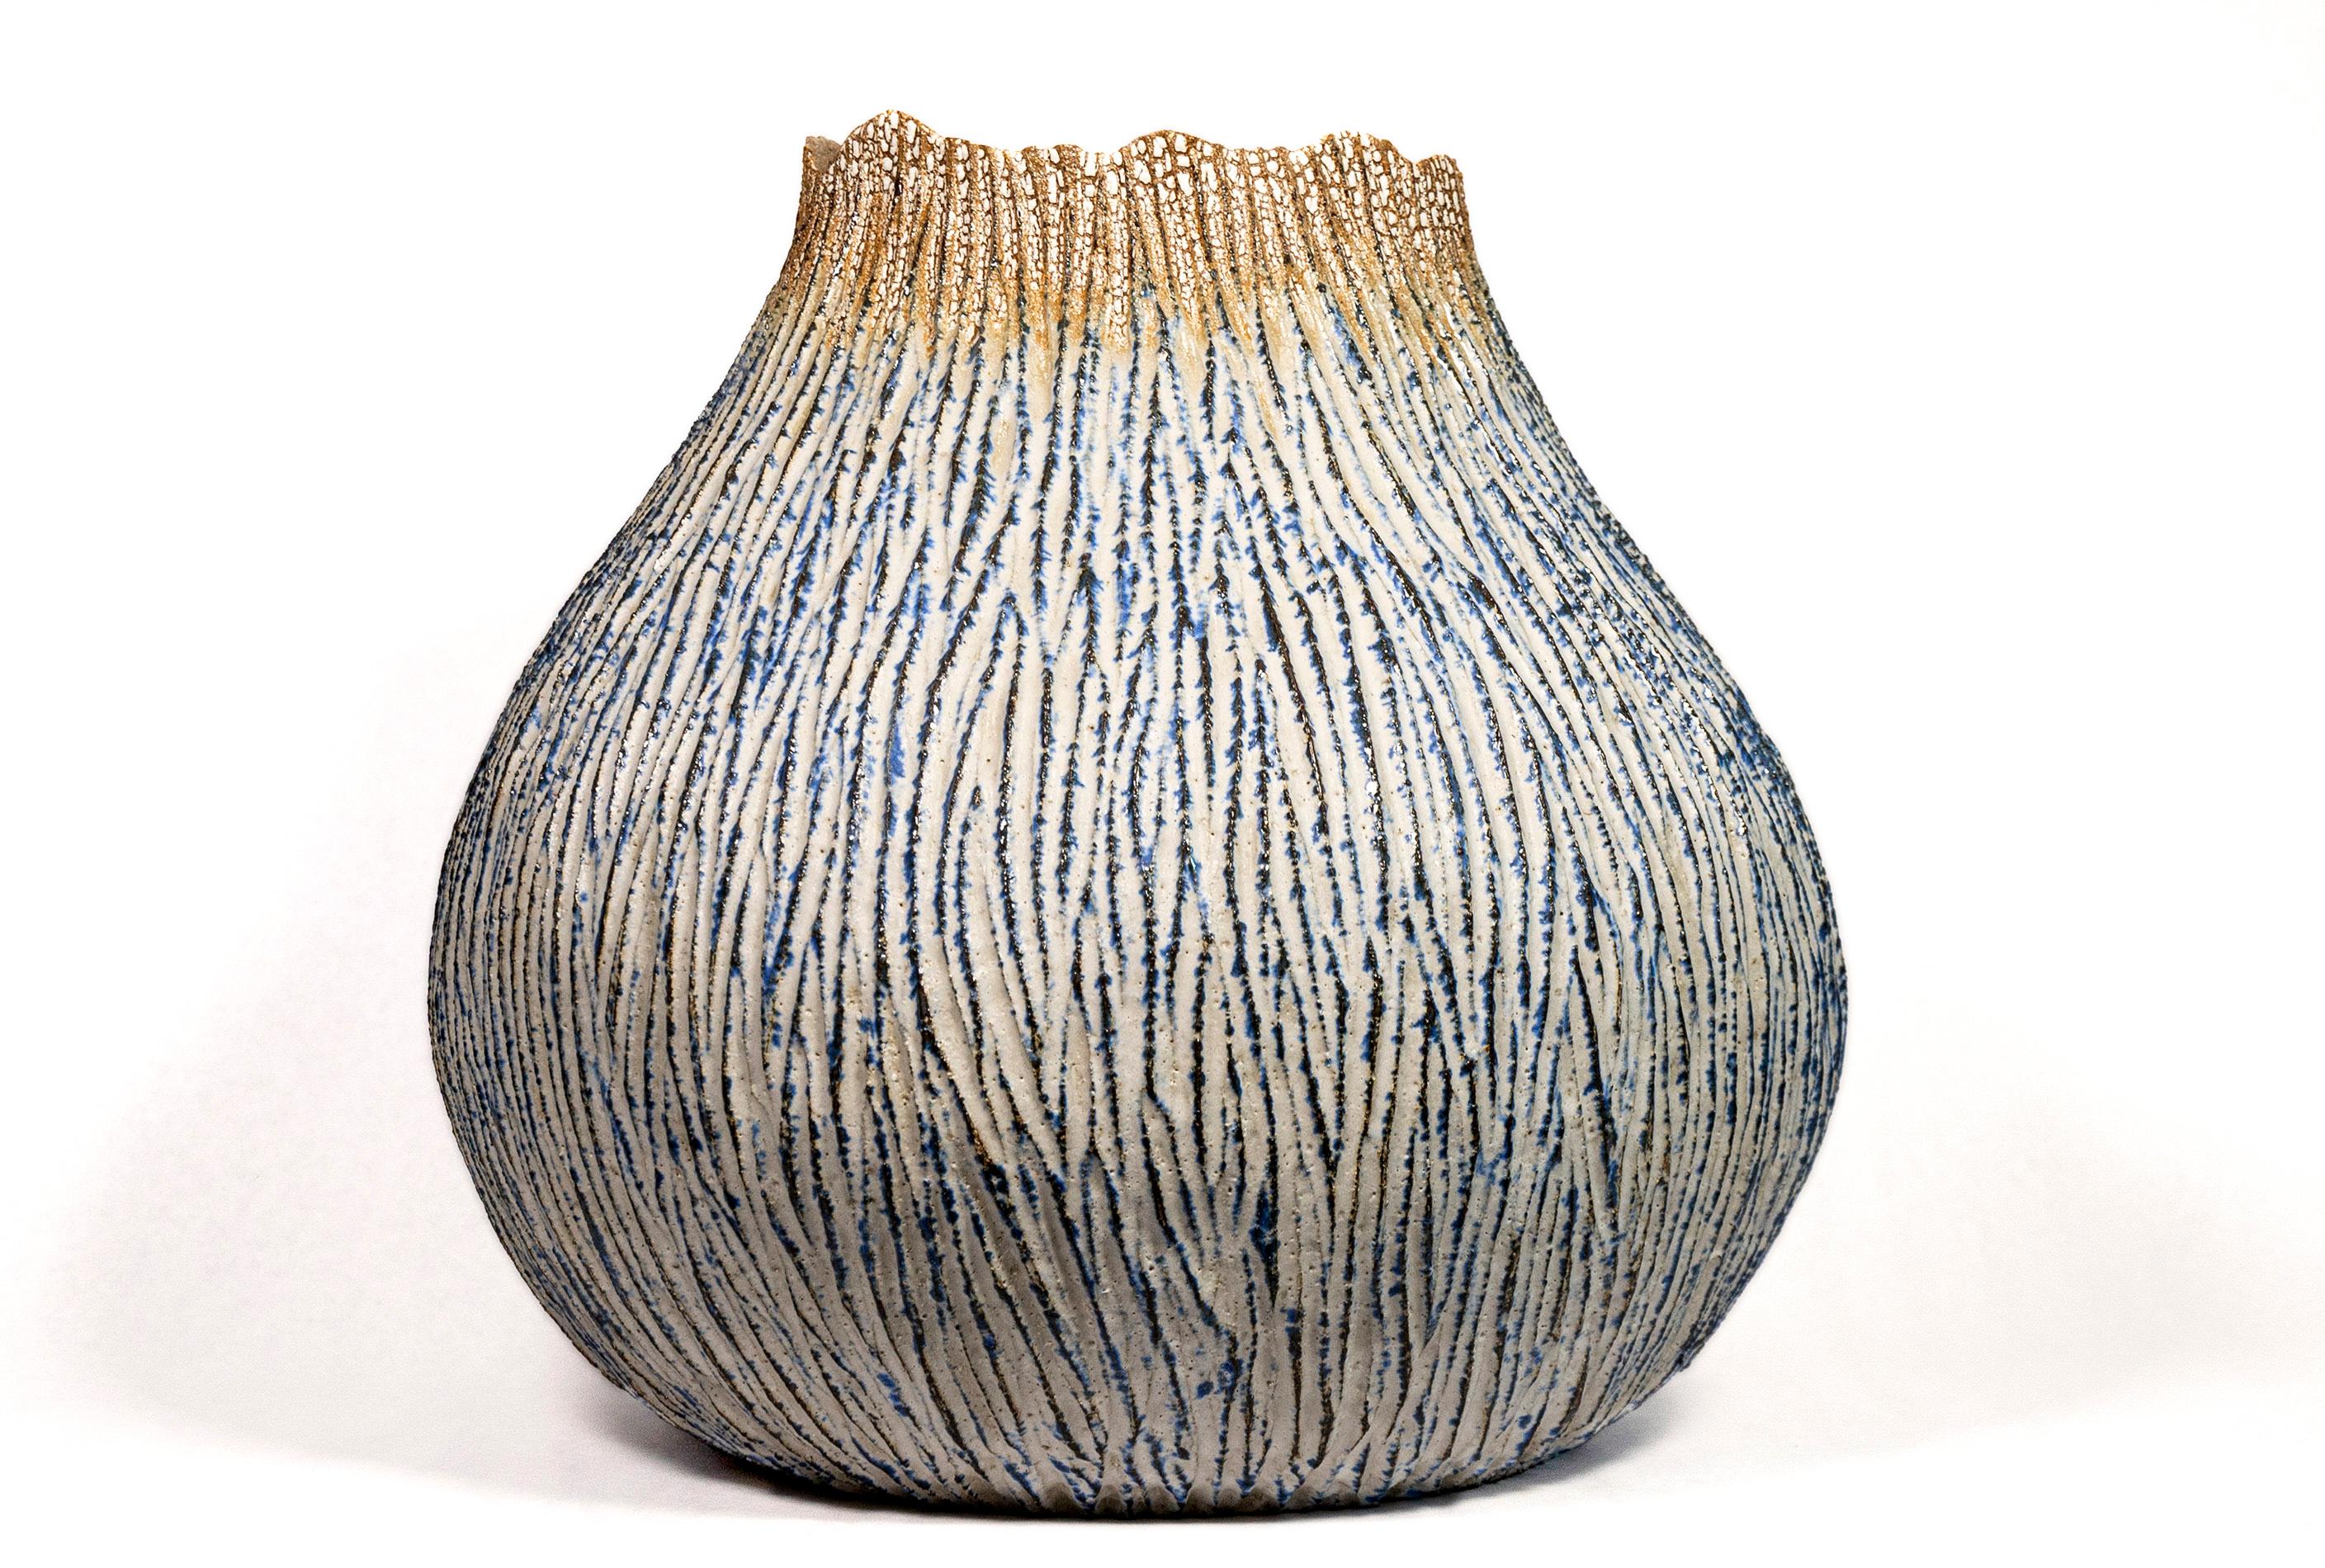 Haptic Series Cobalt & White Extra-Large - textured, ceramic vessel sculpture - Sculpture by Bill Greaves